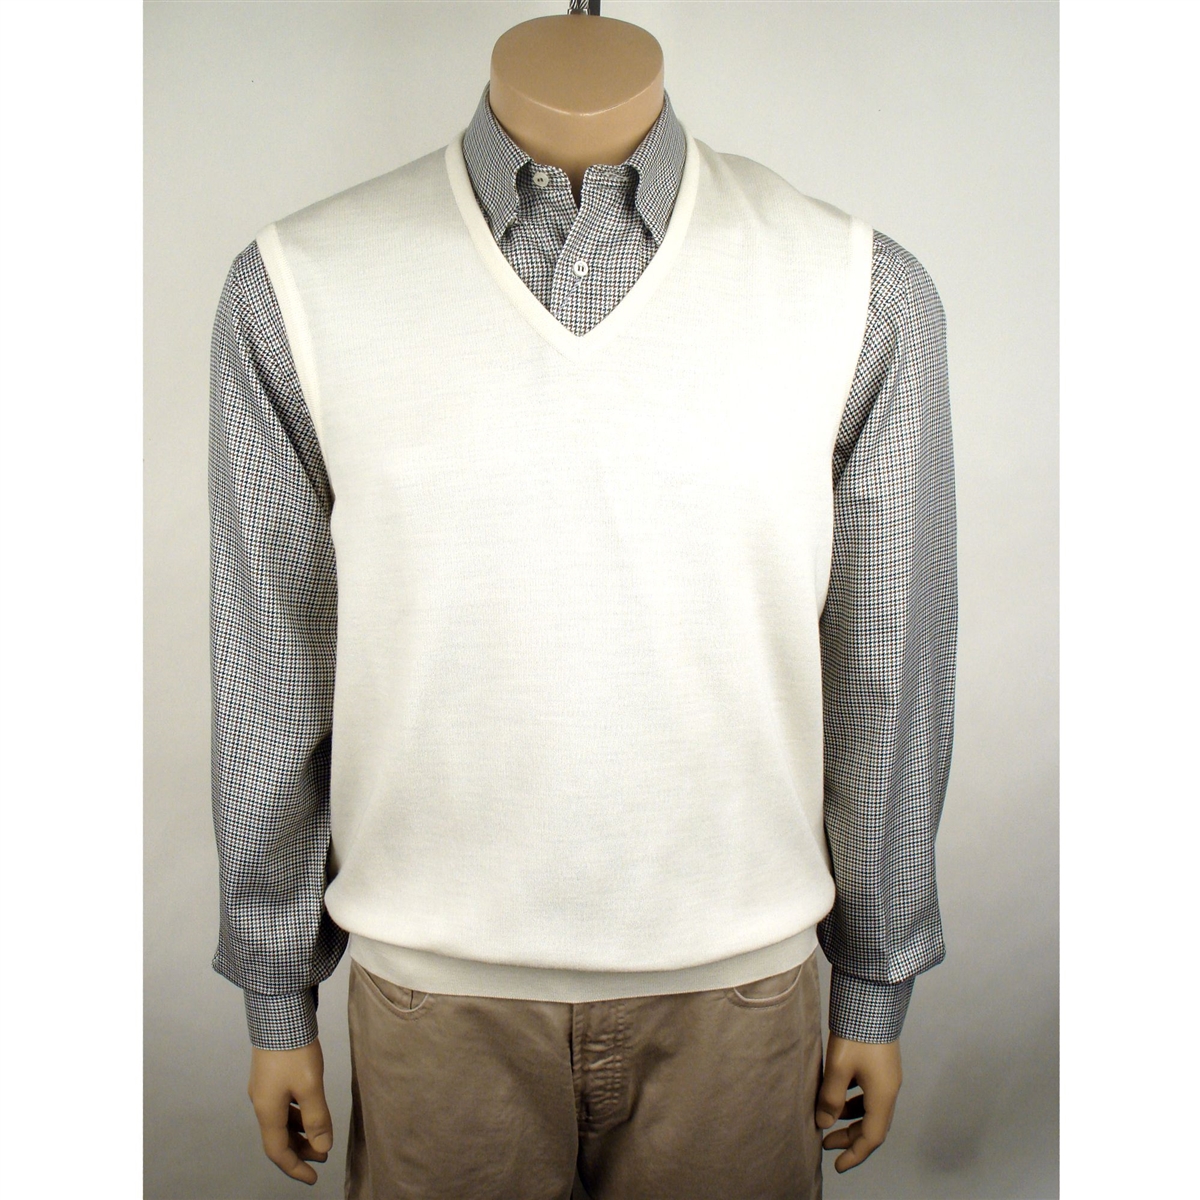 Classic Merino Wool Pullover Vest in White by St. Croix - Hansen's Clothing